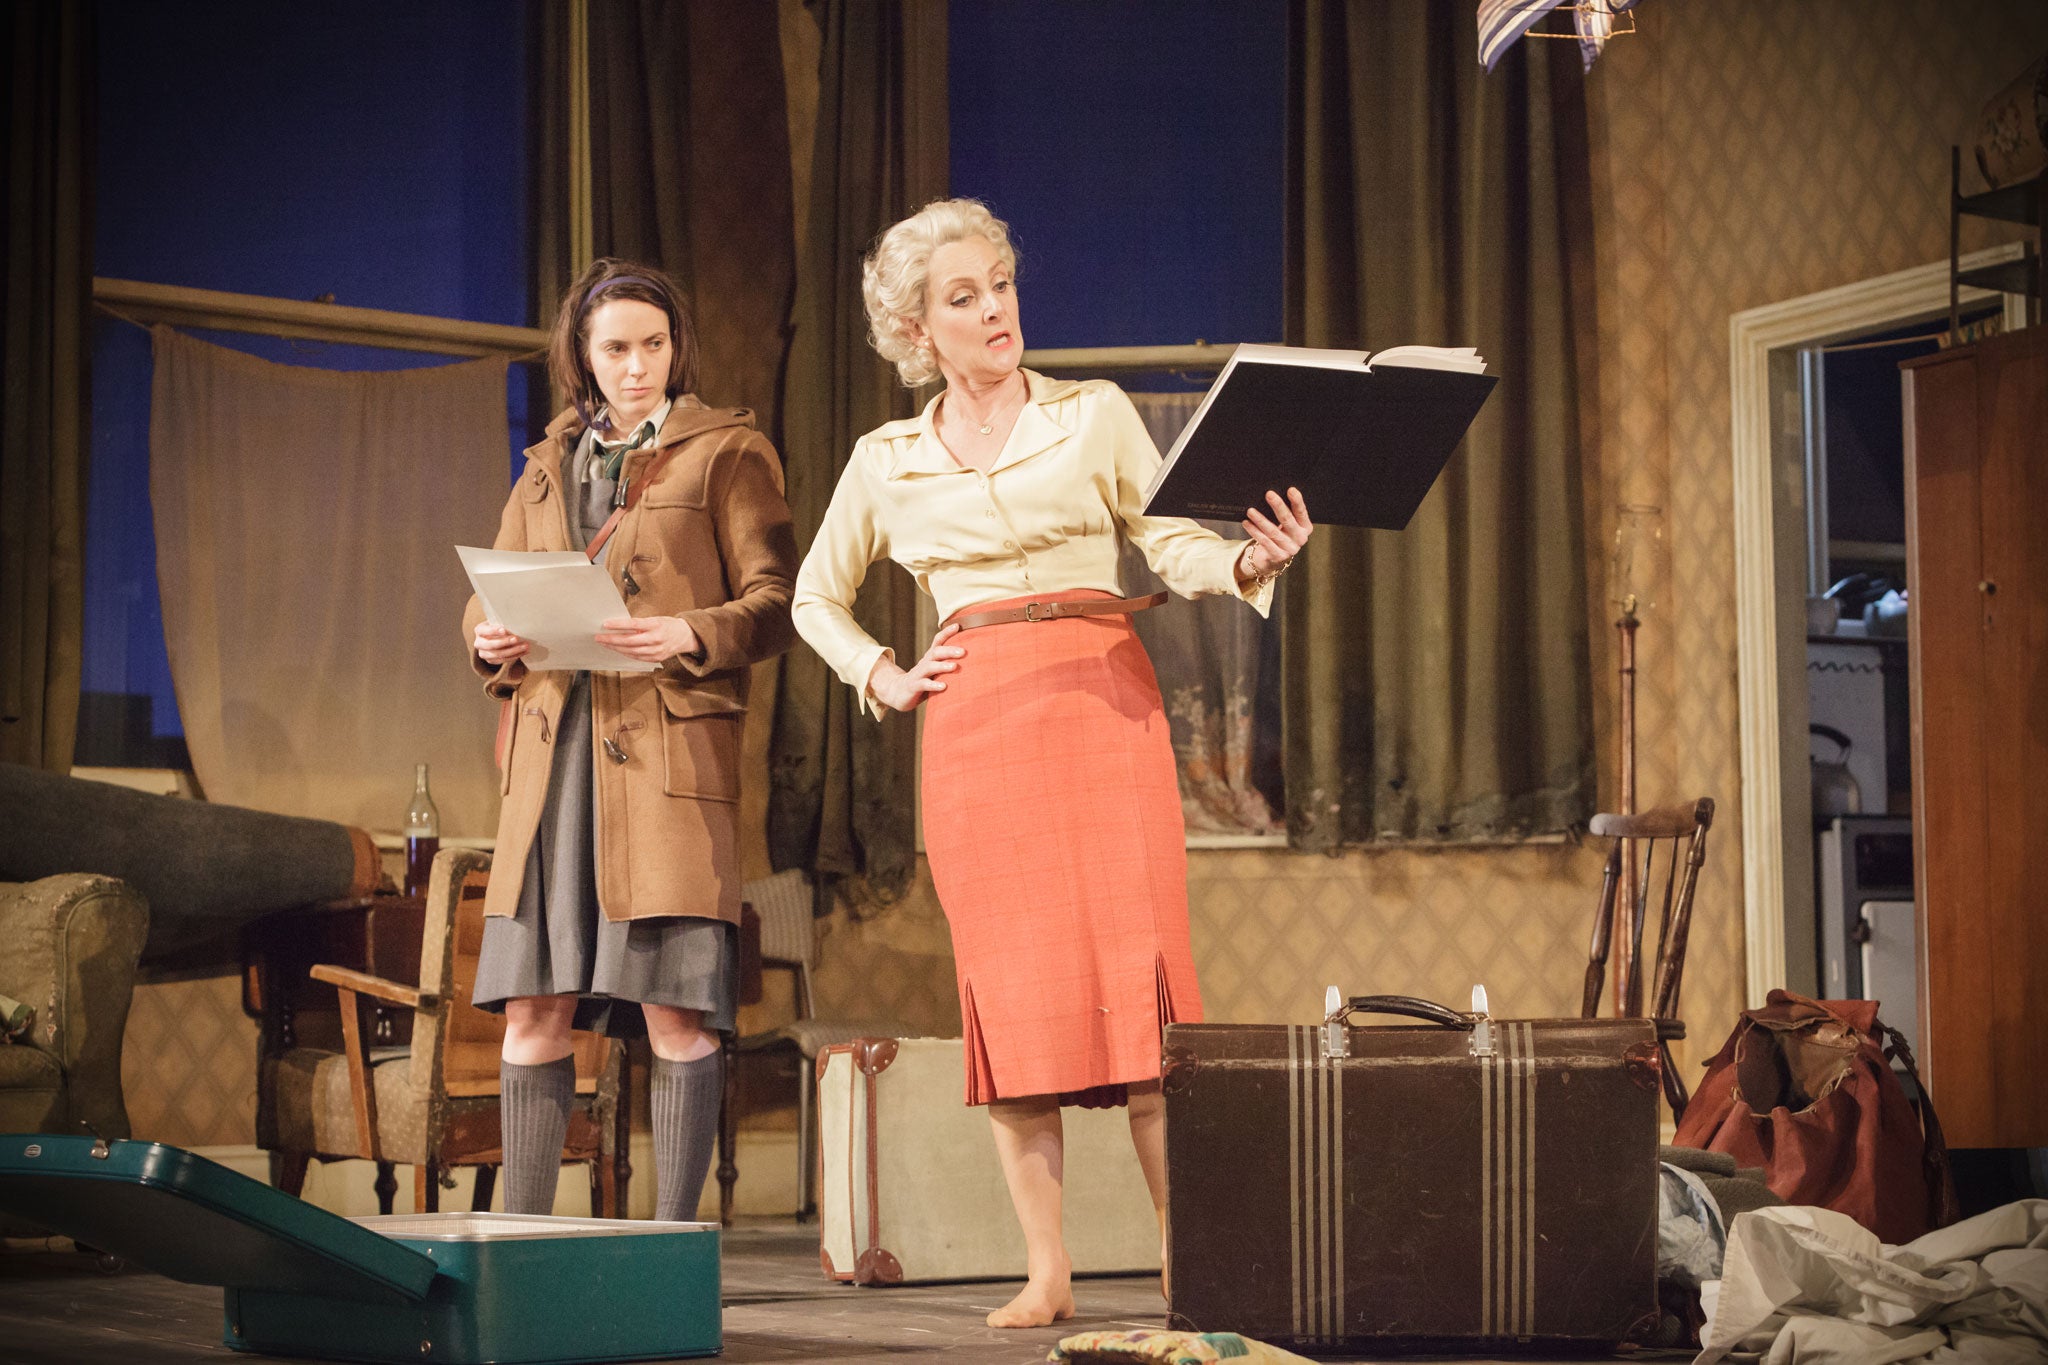 Kate O’Flynn (Jo) and Lesley Sharp (Helen) in 'A Taste of Honey' at the National Theatre